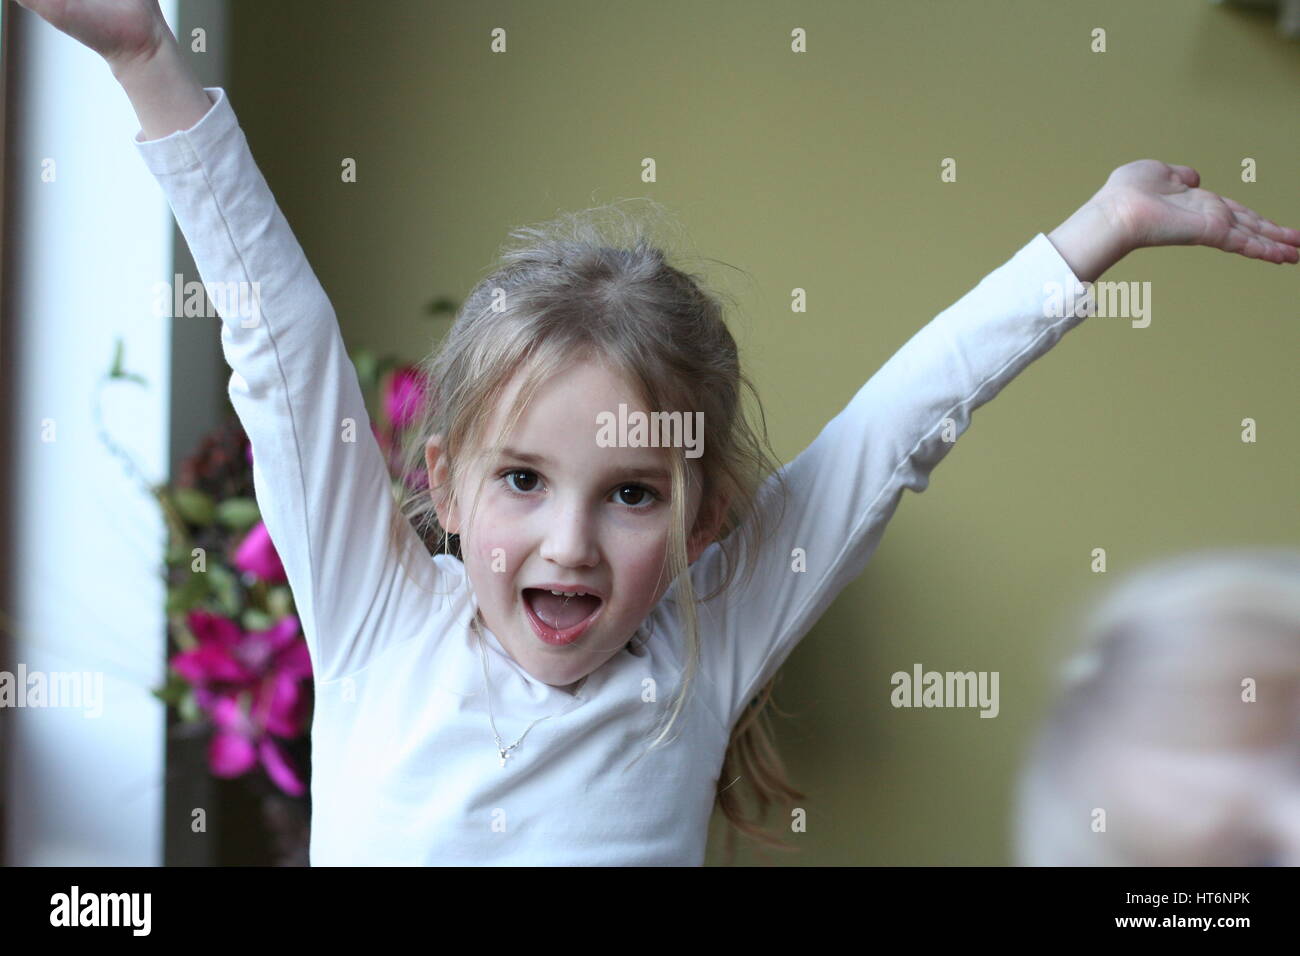 Girl with her arms in the air looking happy Stock Photo